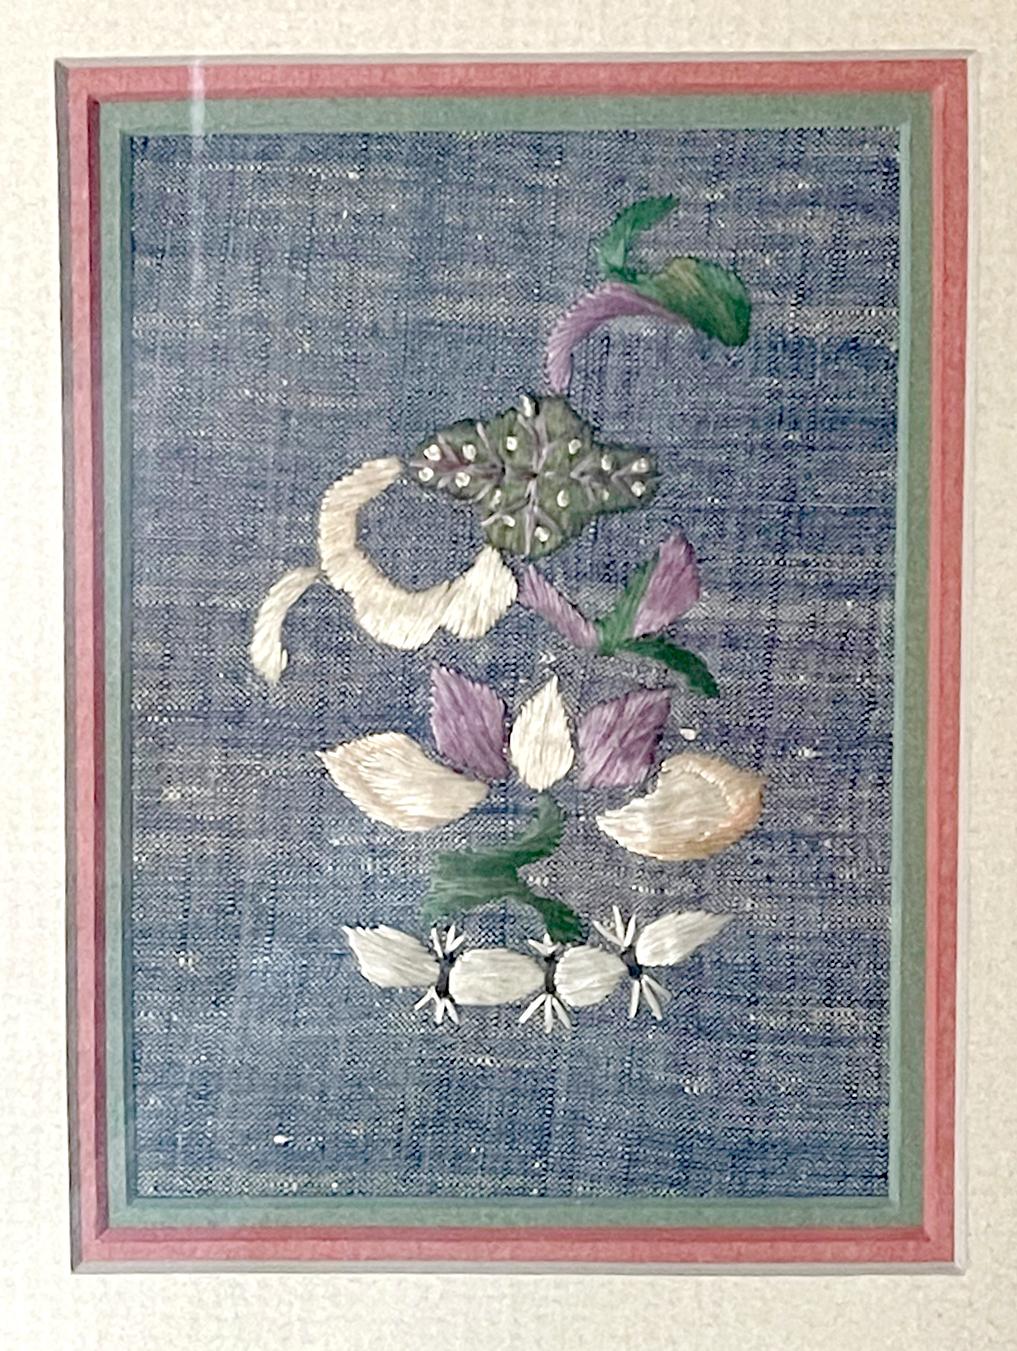 A pair of two antique textile fragments from China, circa 19th century Qing dynasty, professionally displayed in matching giltwood frame. On a light indigo blue linen background, one-piece depicts a flower branch, the other a cluster of peaches.